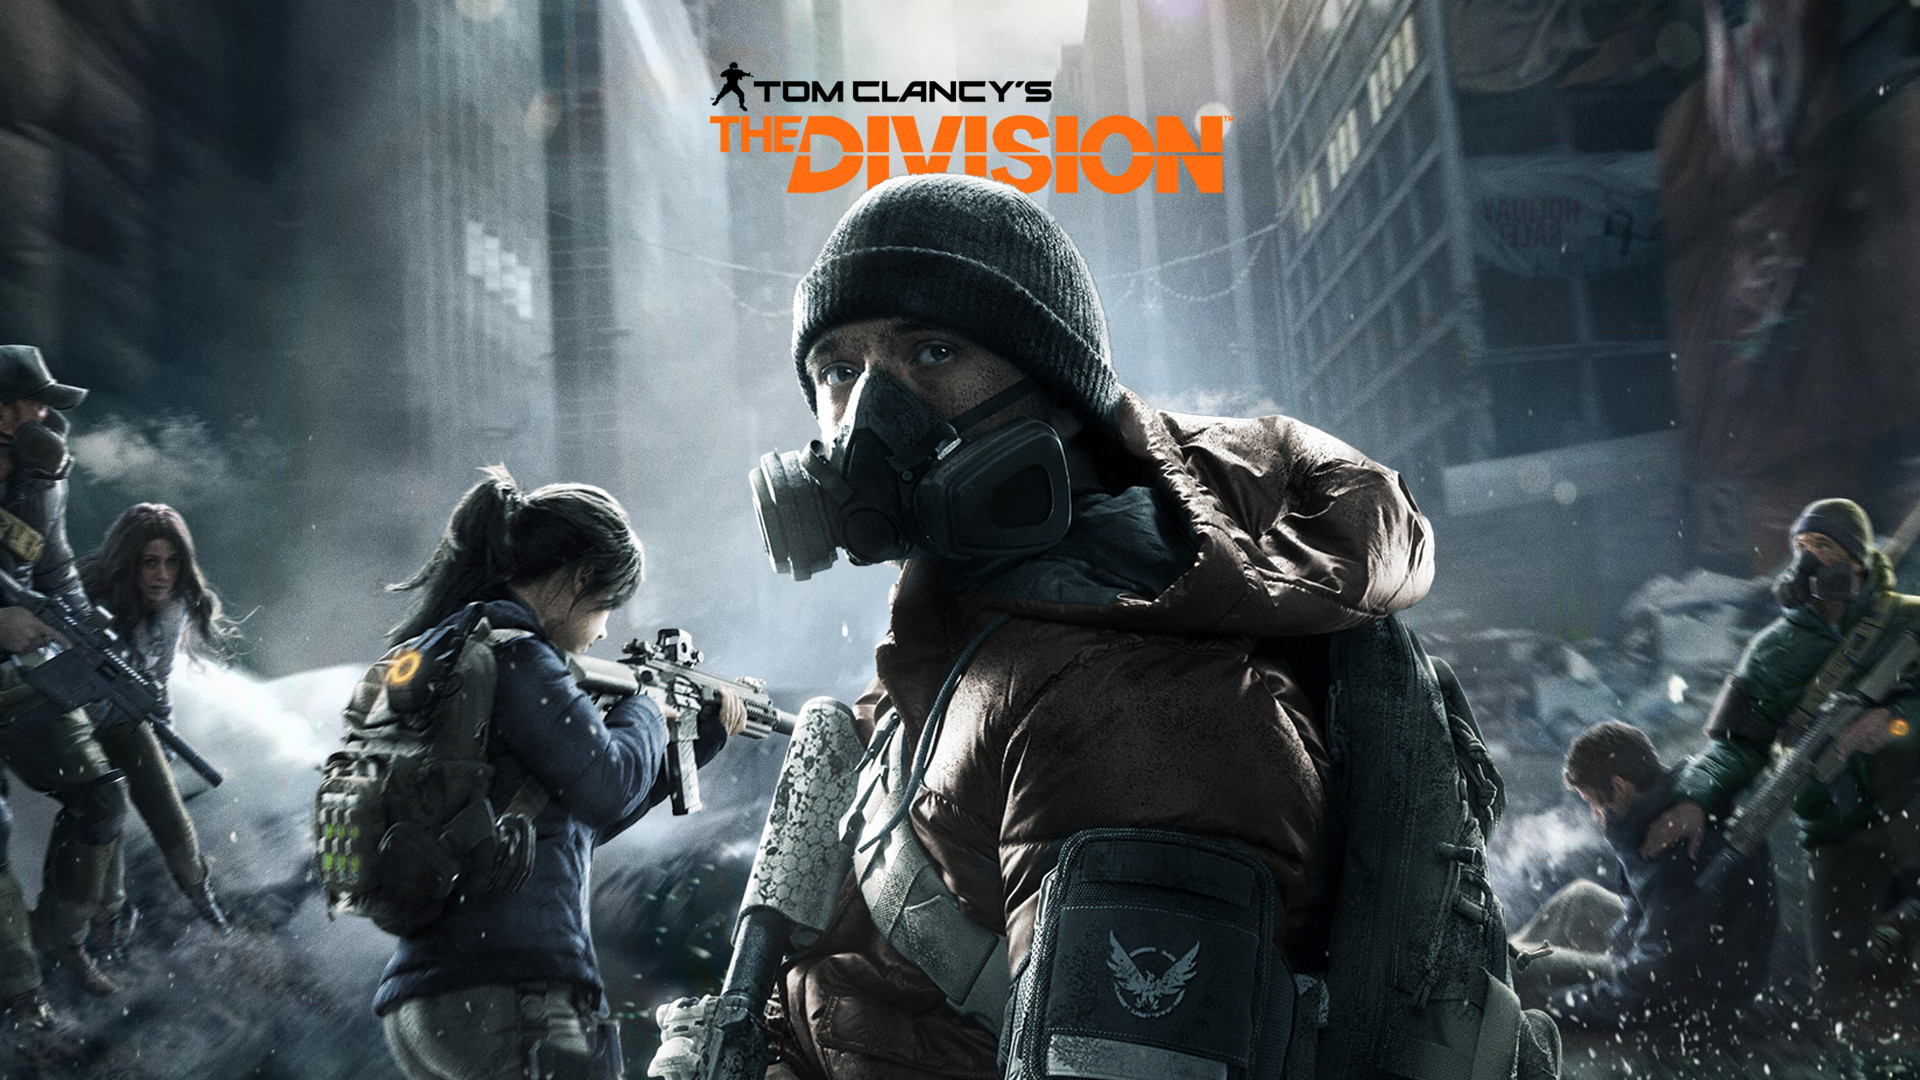 1920x1080 Tom Clancy's The Division HD Wallpaper